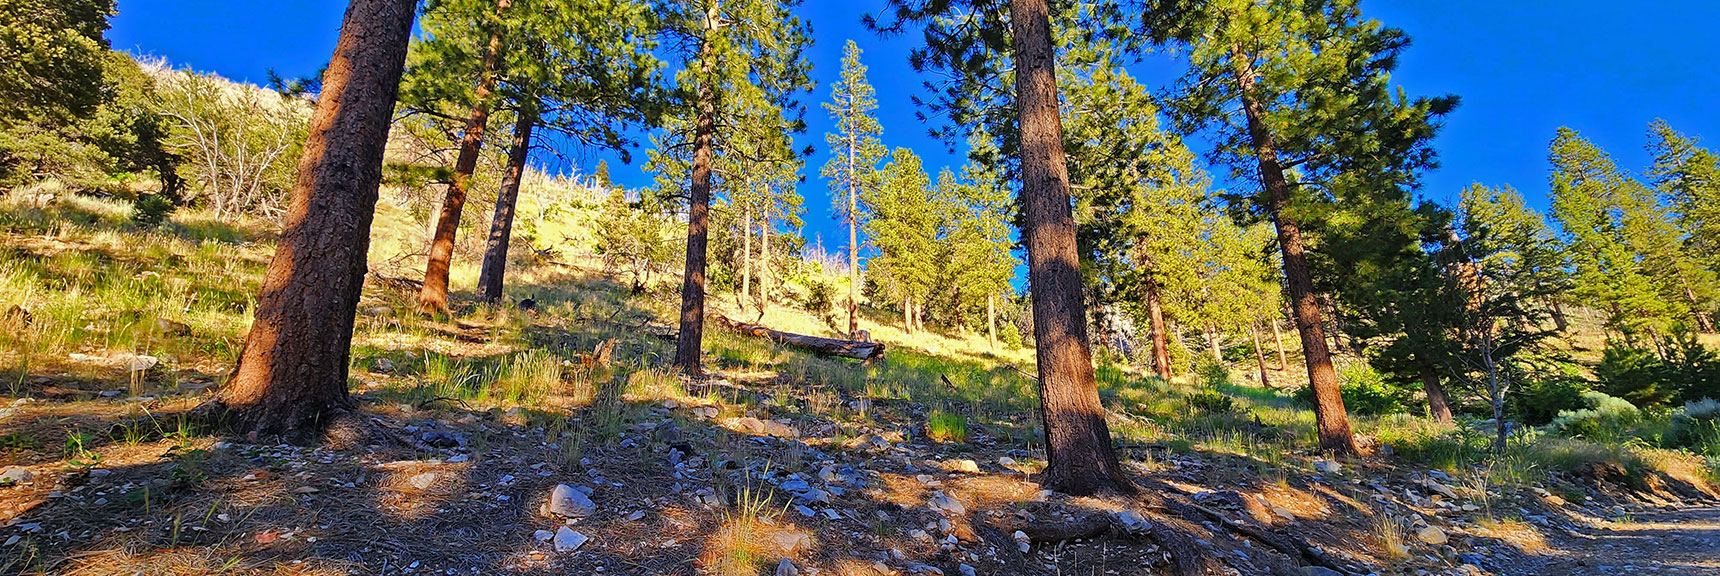 This Will Work Better as Future Ascent Route. East Side of W. Ridge. | Fletcher Canyon to Harris Mountain Summit | Mt Charleston Wilderness, Nevada